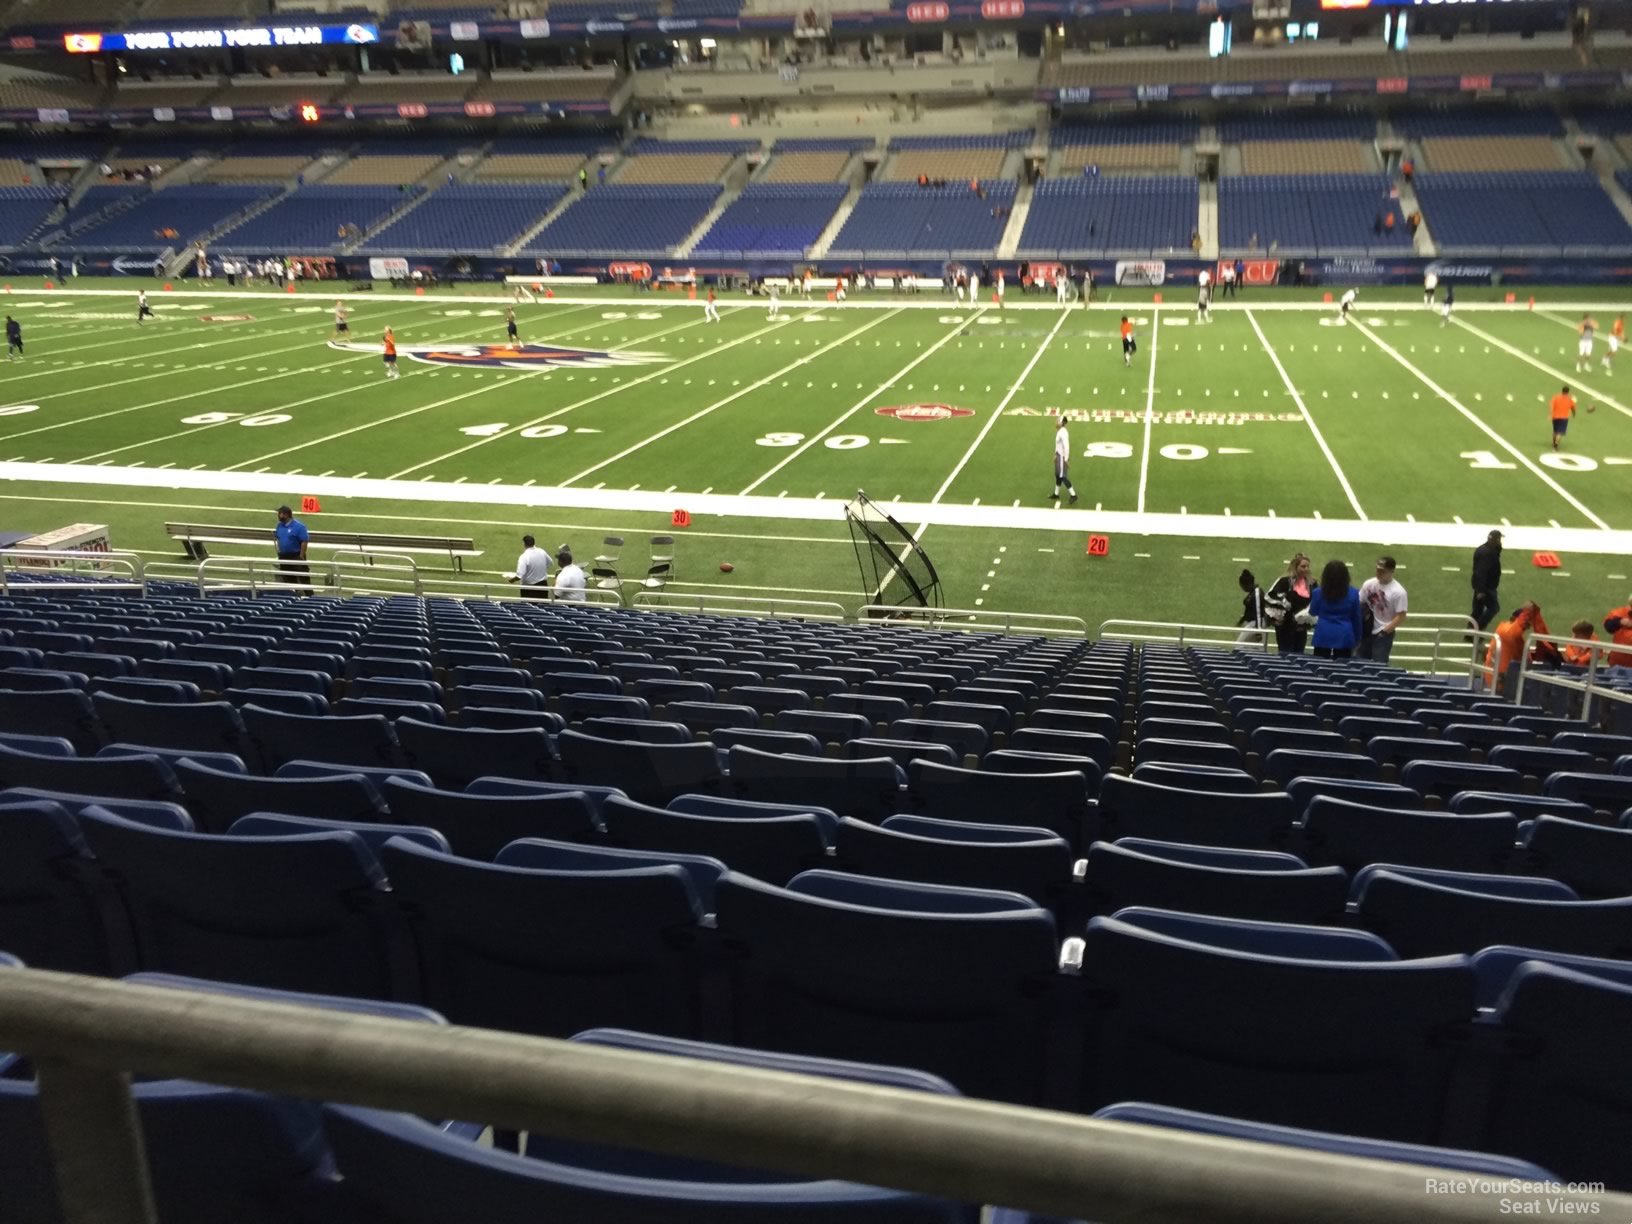 section 132, row 18 seat view  for football - alamodome